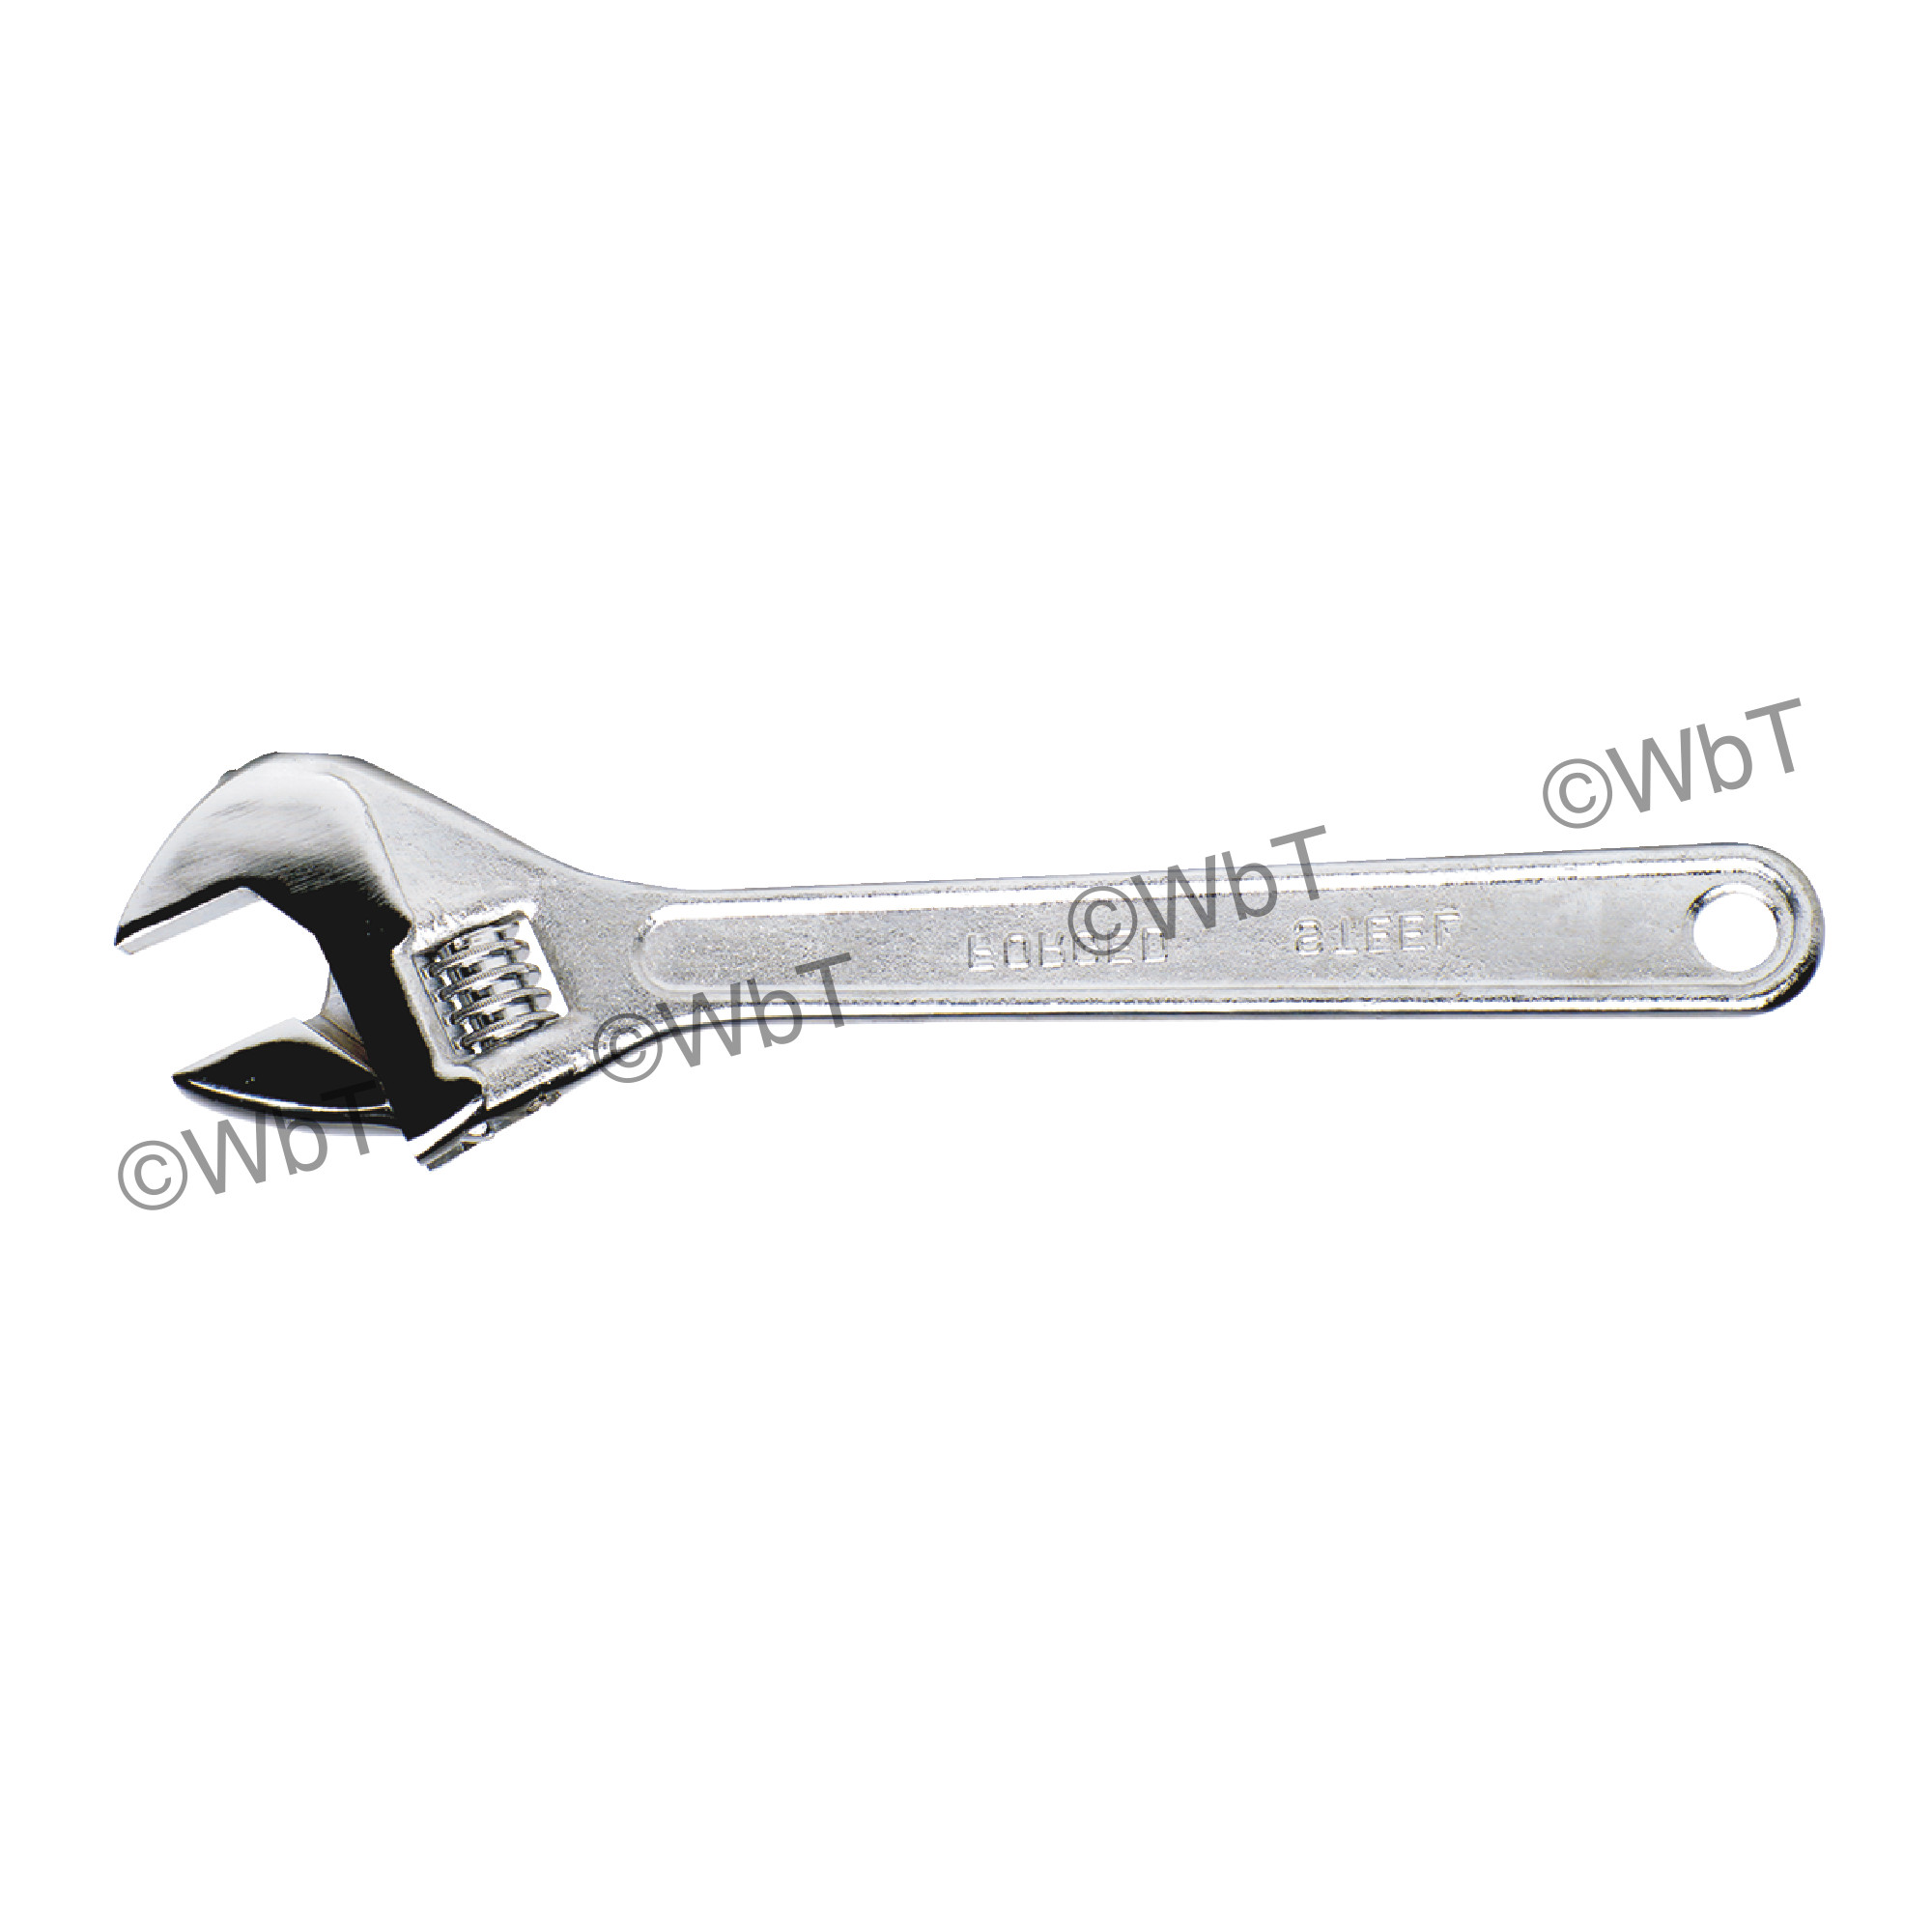 Adjustable Wrench - Model: 5032   SIZE: 8"   Capacity: 15/16"